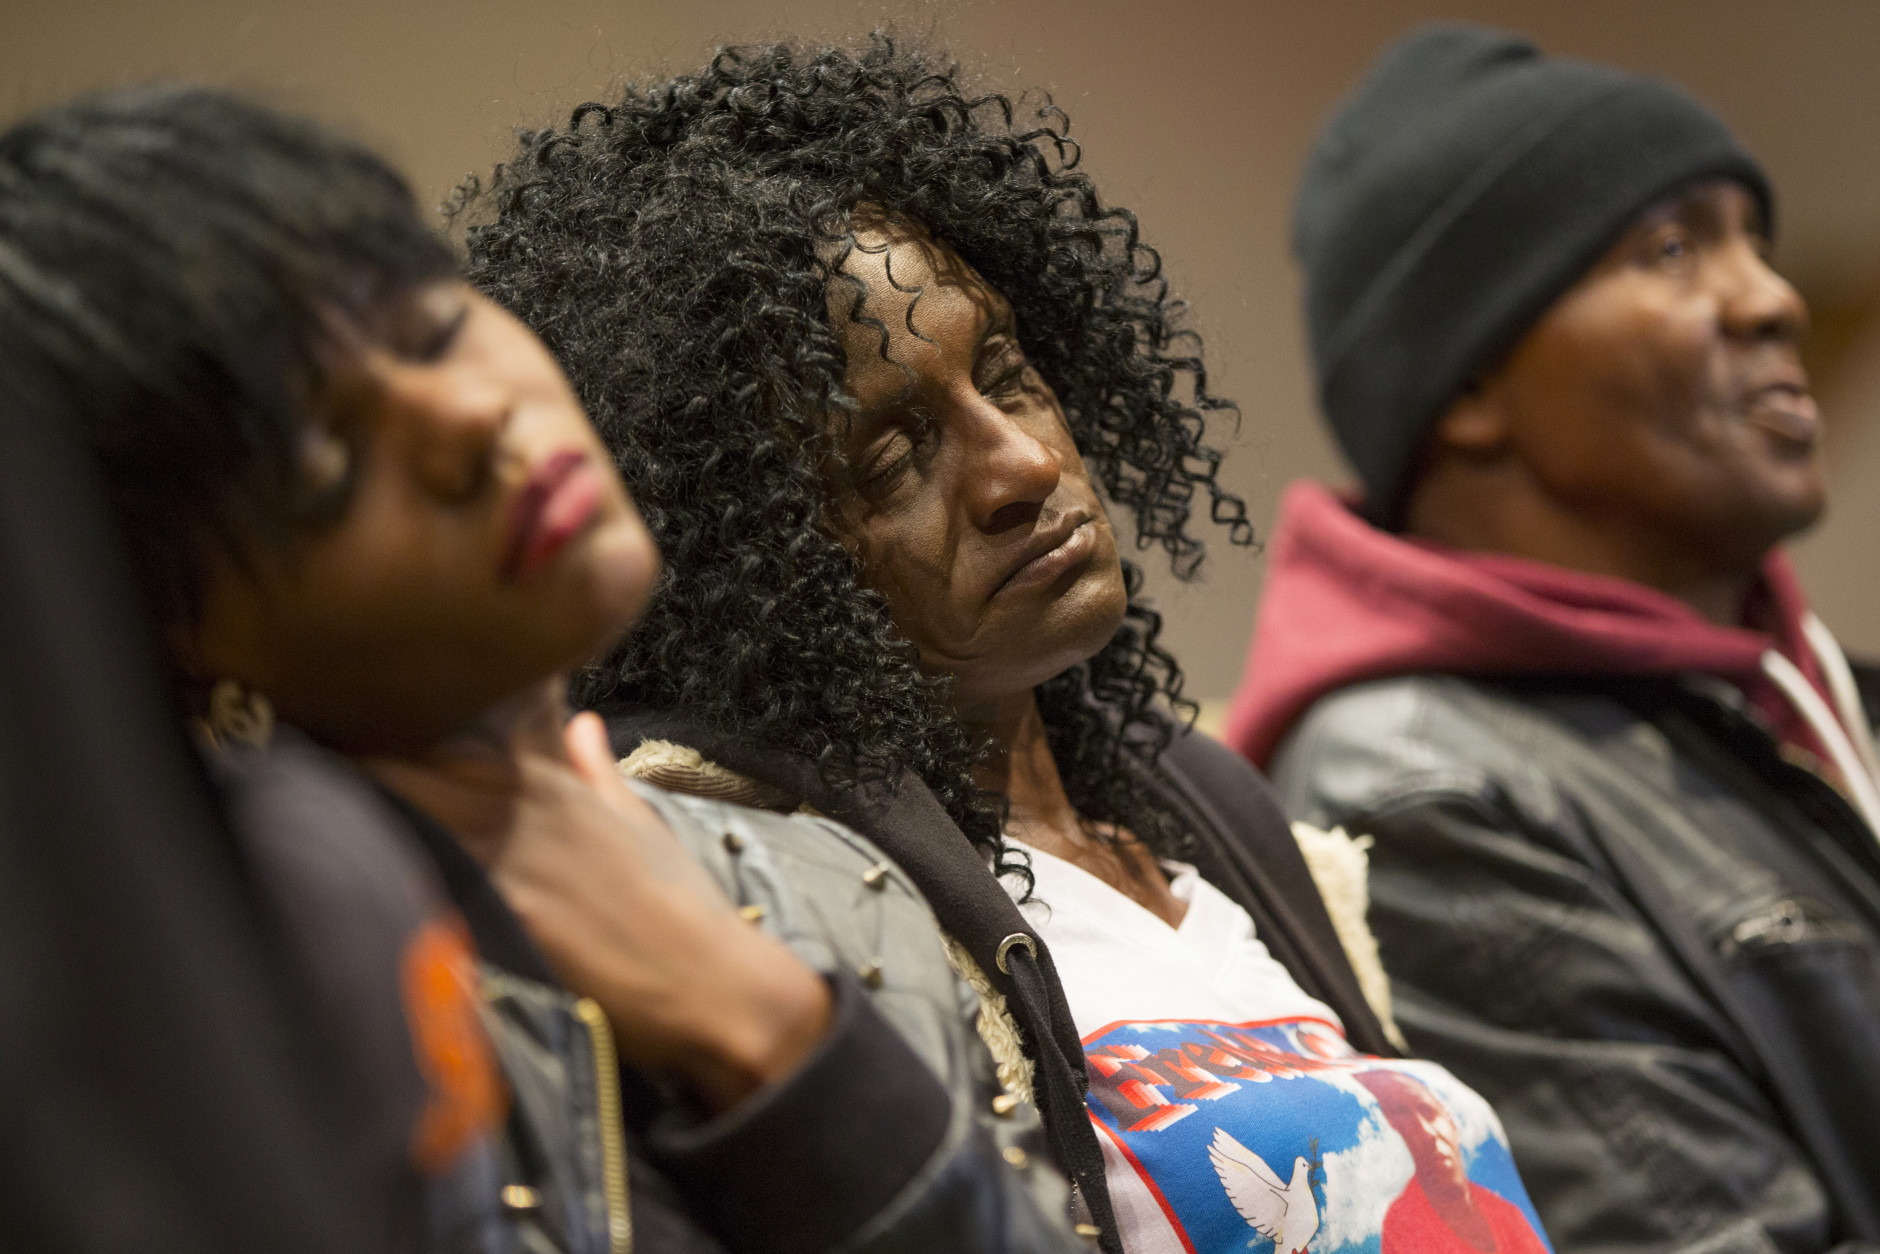 Family members of Freddie Gray, sister Fredricka Gray, left, mother Gloria Darden, center, and stepfather Richard Shipley listen during a news conference after a day of unrest following the funeral of Freddie Gray on Monday, April 27, 2015, in Baltimore. Rioters plunged part of Baltimore into chaos torching a pharmacy, setting police cars ablaze and throwing bricks at officers. (AP Photo/Evan Vucci)